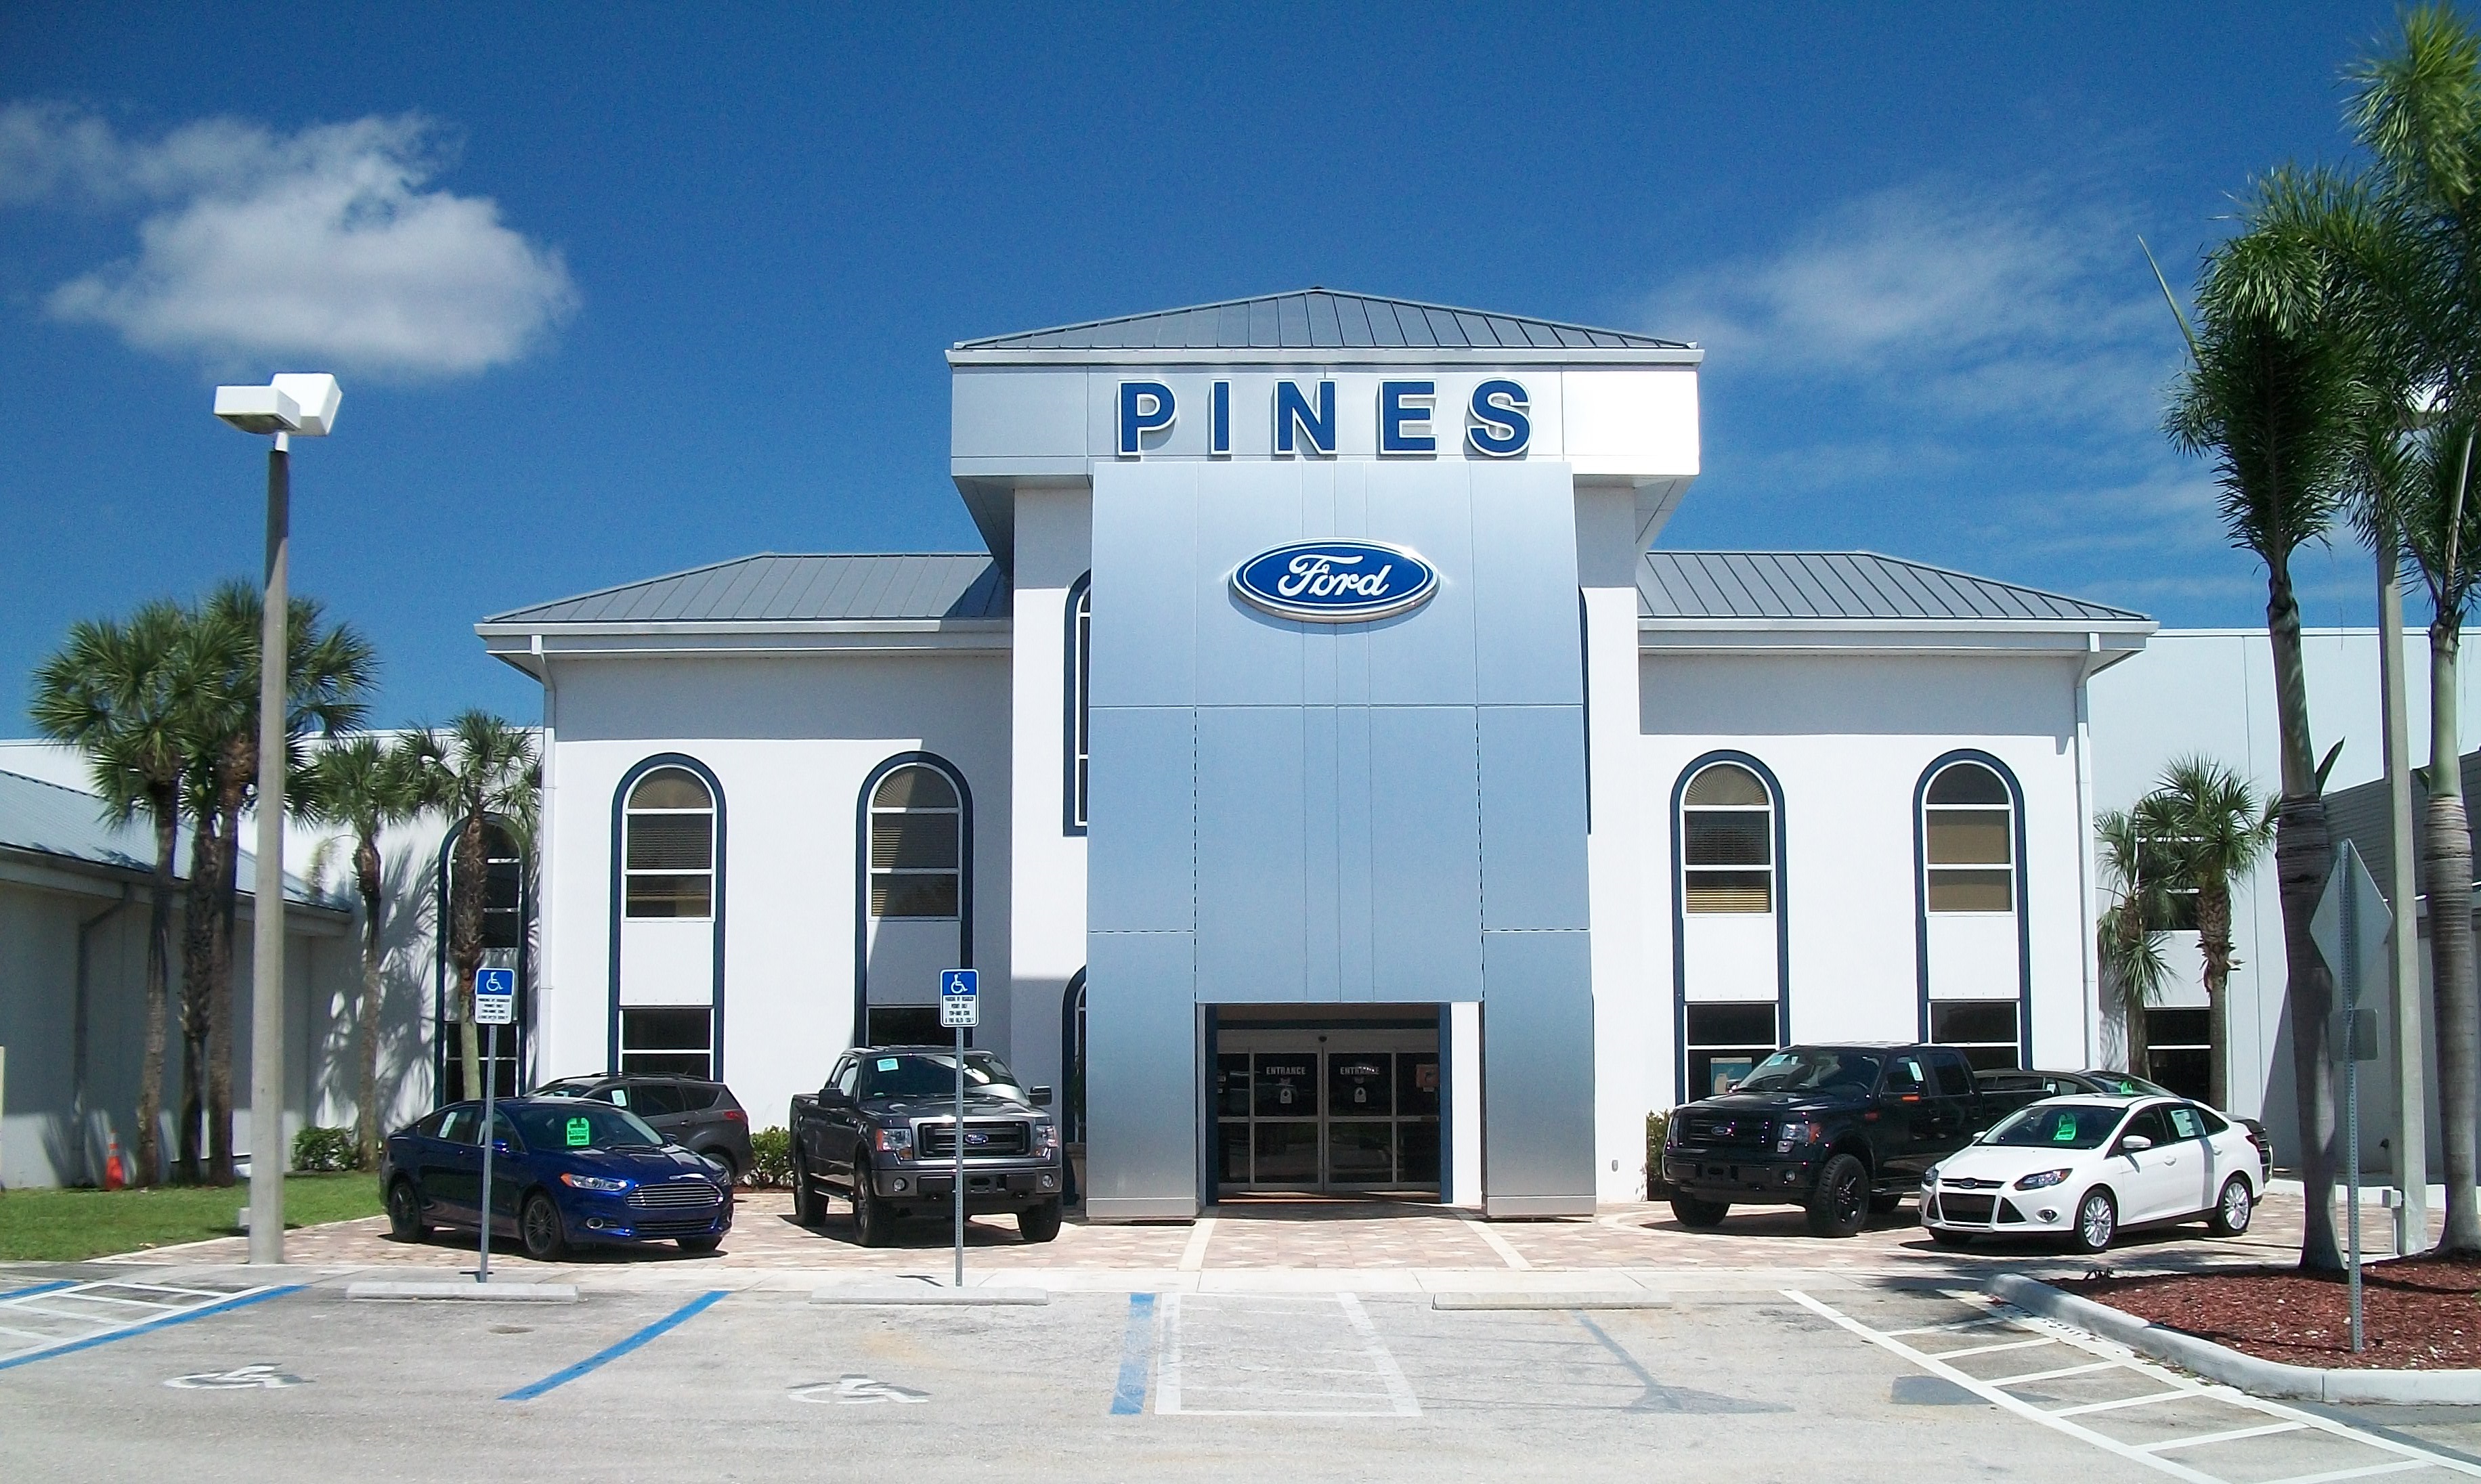 Pines Ford in Pembroke pines, FL, Rated 4.2 Stars